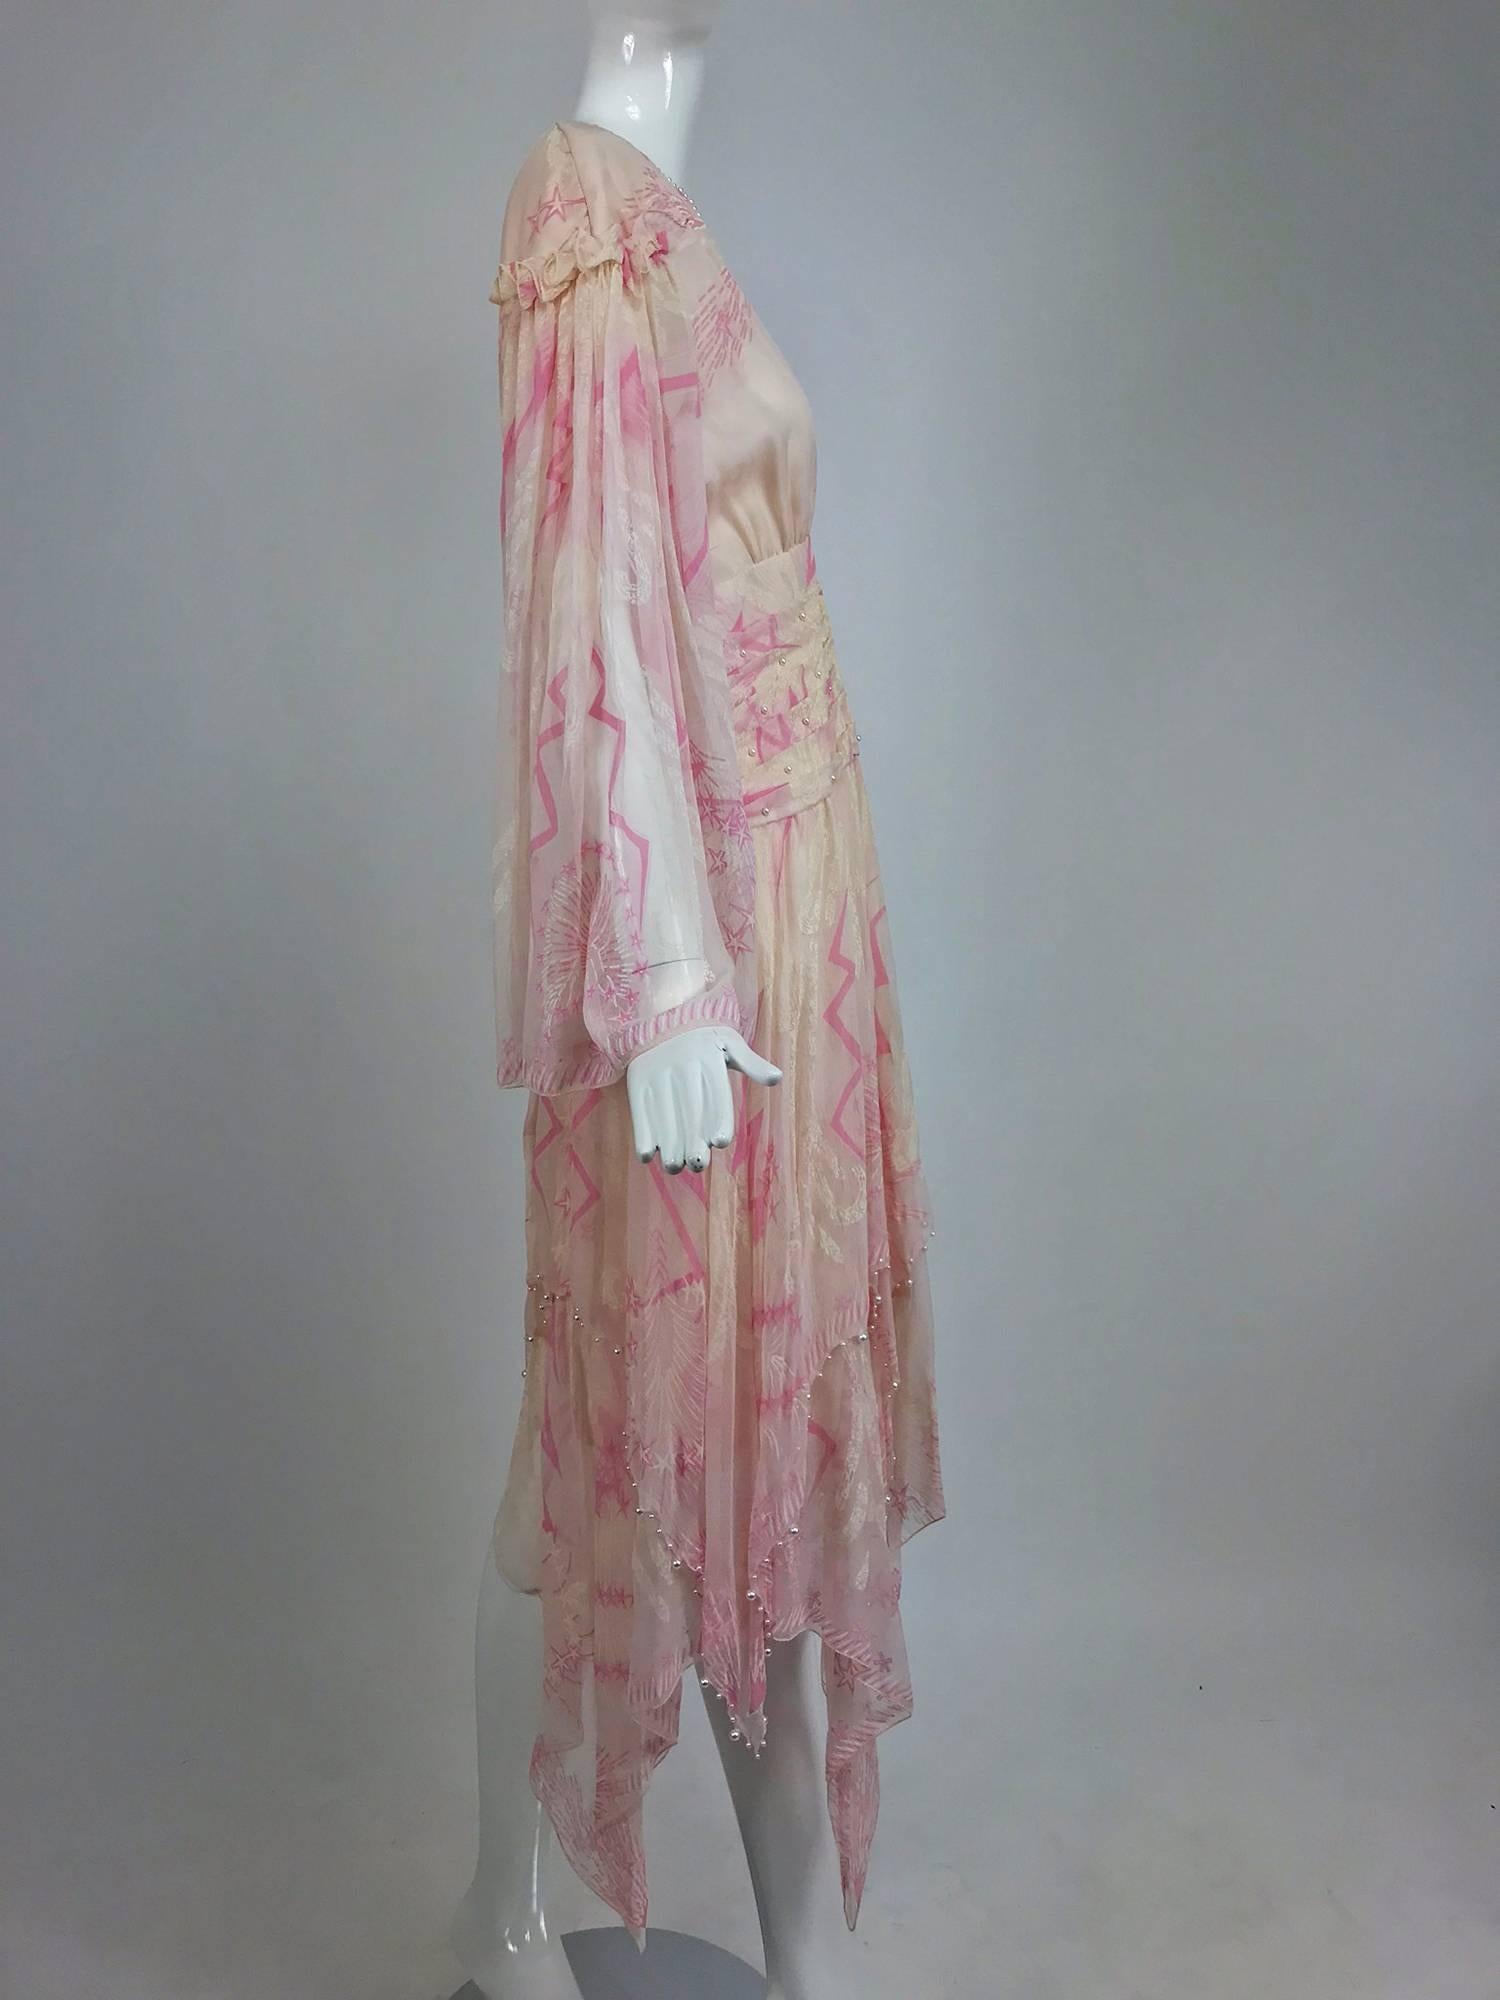 Zandra Rhodes cream and pink silk star asymmetrical hem dress 1989...Pale cream chiffon with painted pink stars and lightening bolts cover this full sleeve dress that has a deep V neckline,  wide draped waist decorated with tiny pearls ...The